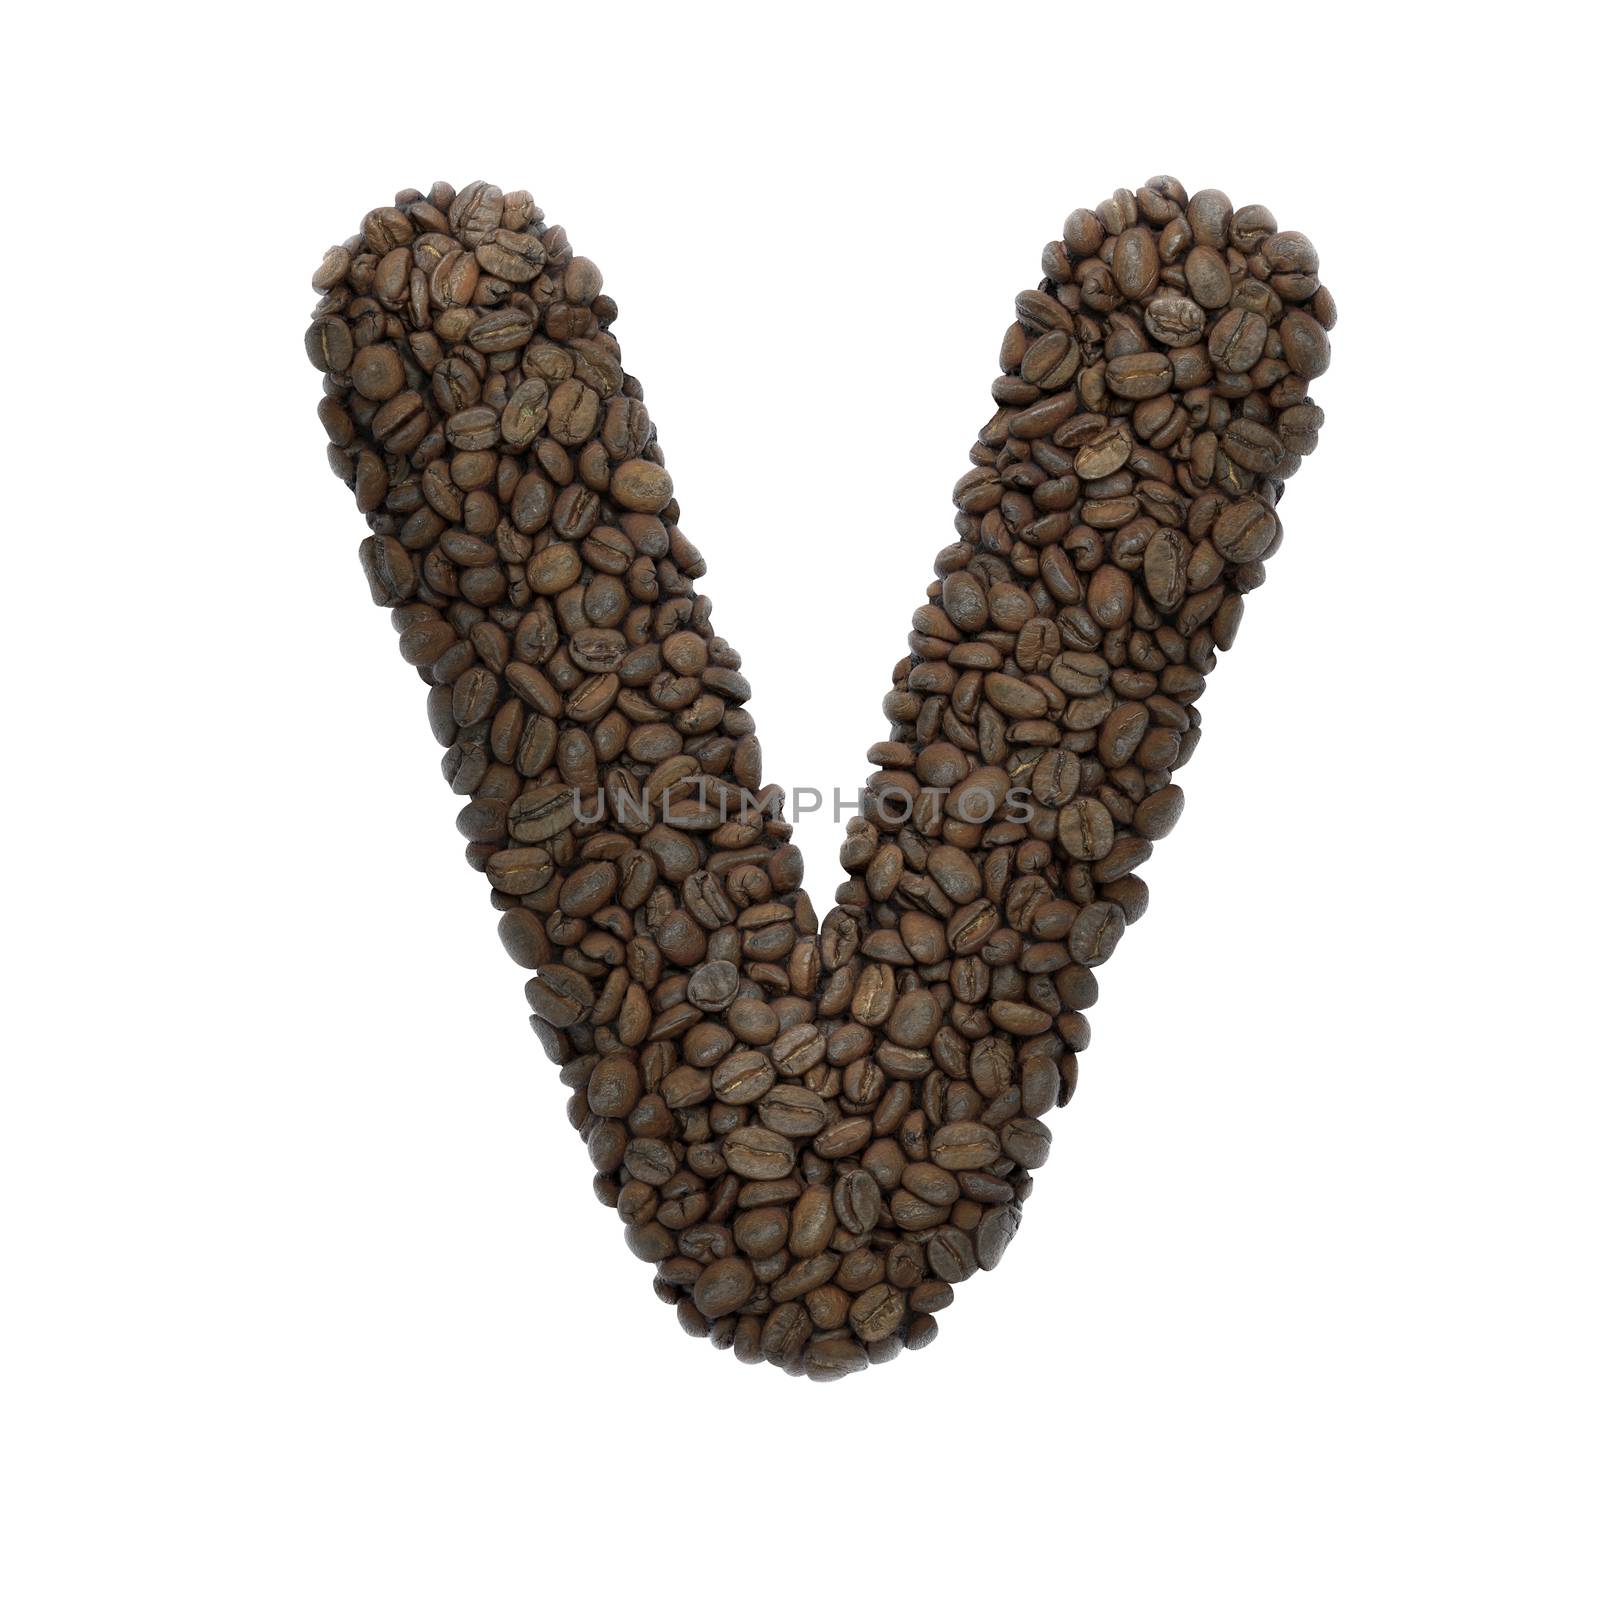 Coffee letter V - Capital 3d roasted beans font isolated on white background. This alphabet is perfect for creative illustrations related but not limited to Coffee, energy, insomnia...